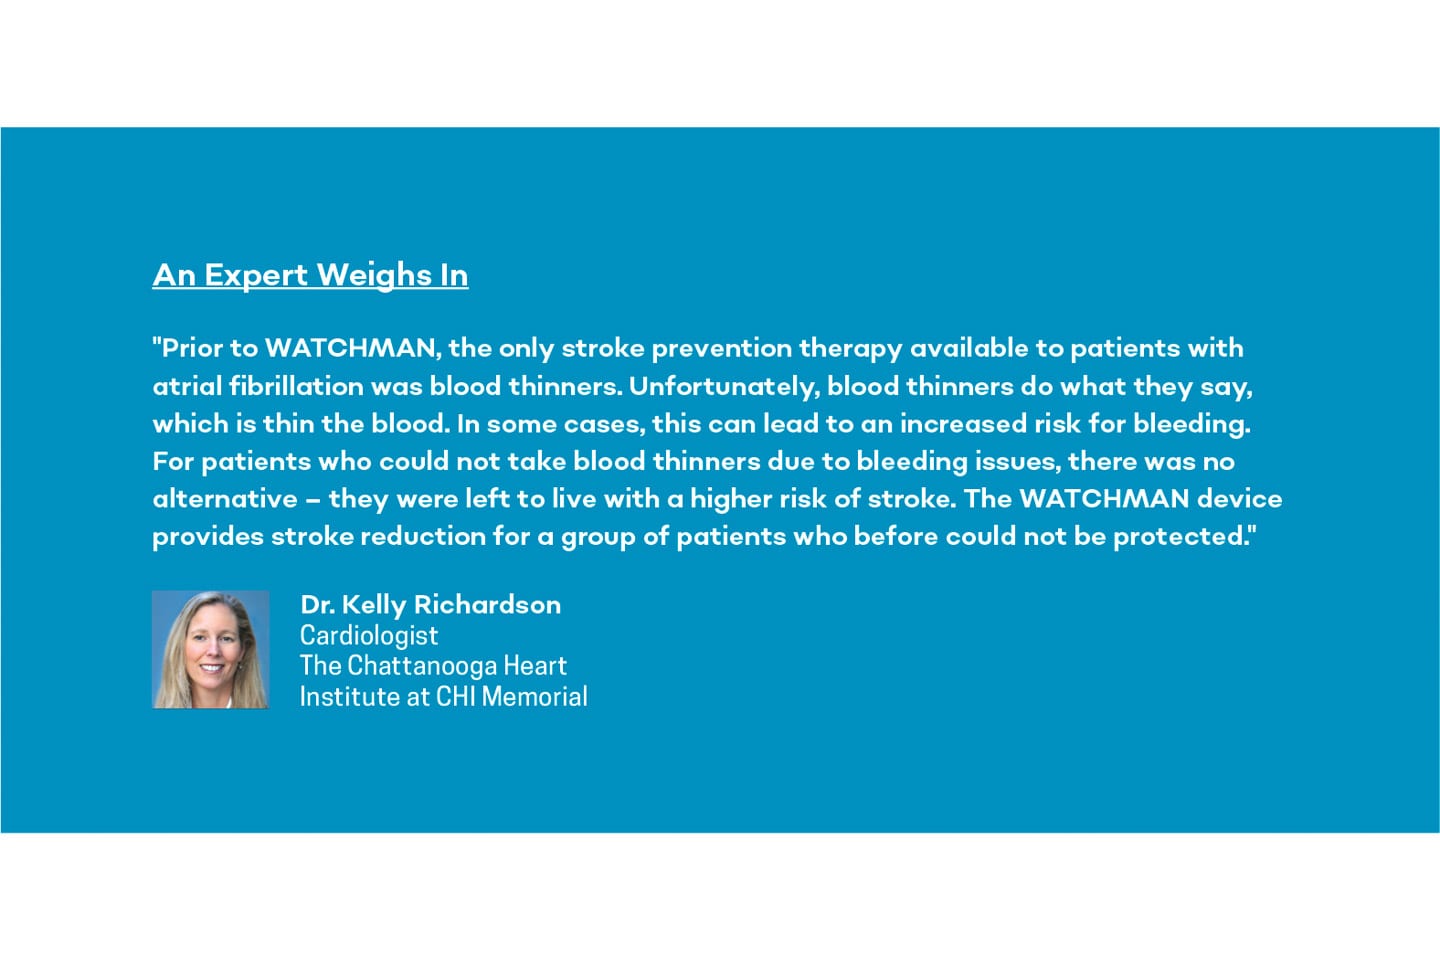 Dr. kelly richardson cardiologist chattanooga heart institute at CHI memorial expert opinion on watchman device